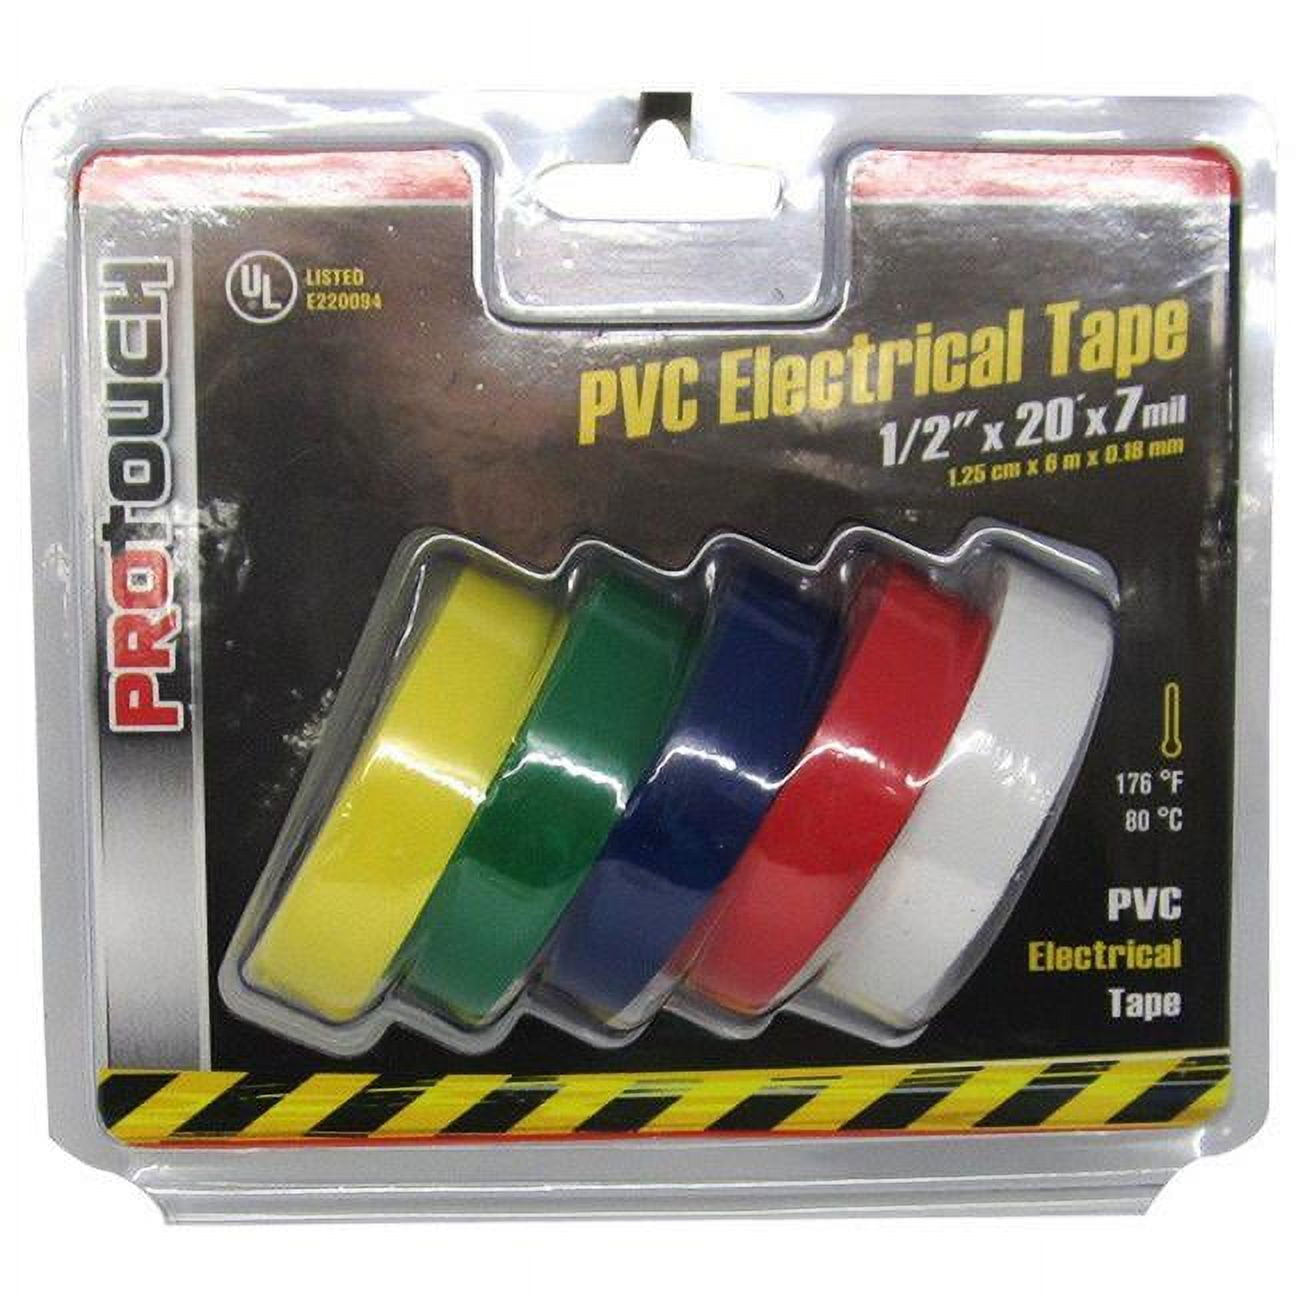 2316270 0.5 X 20 In. Pvc Electrical Tape, Assorted Color - Case Of 48 - 48 Per Pack